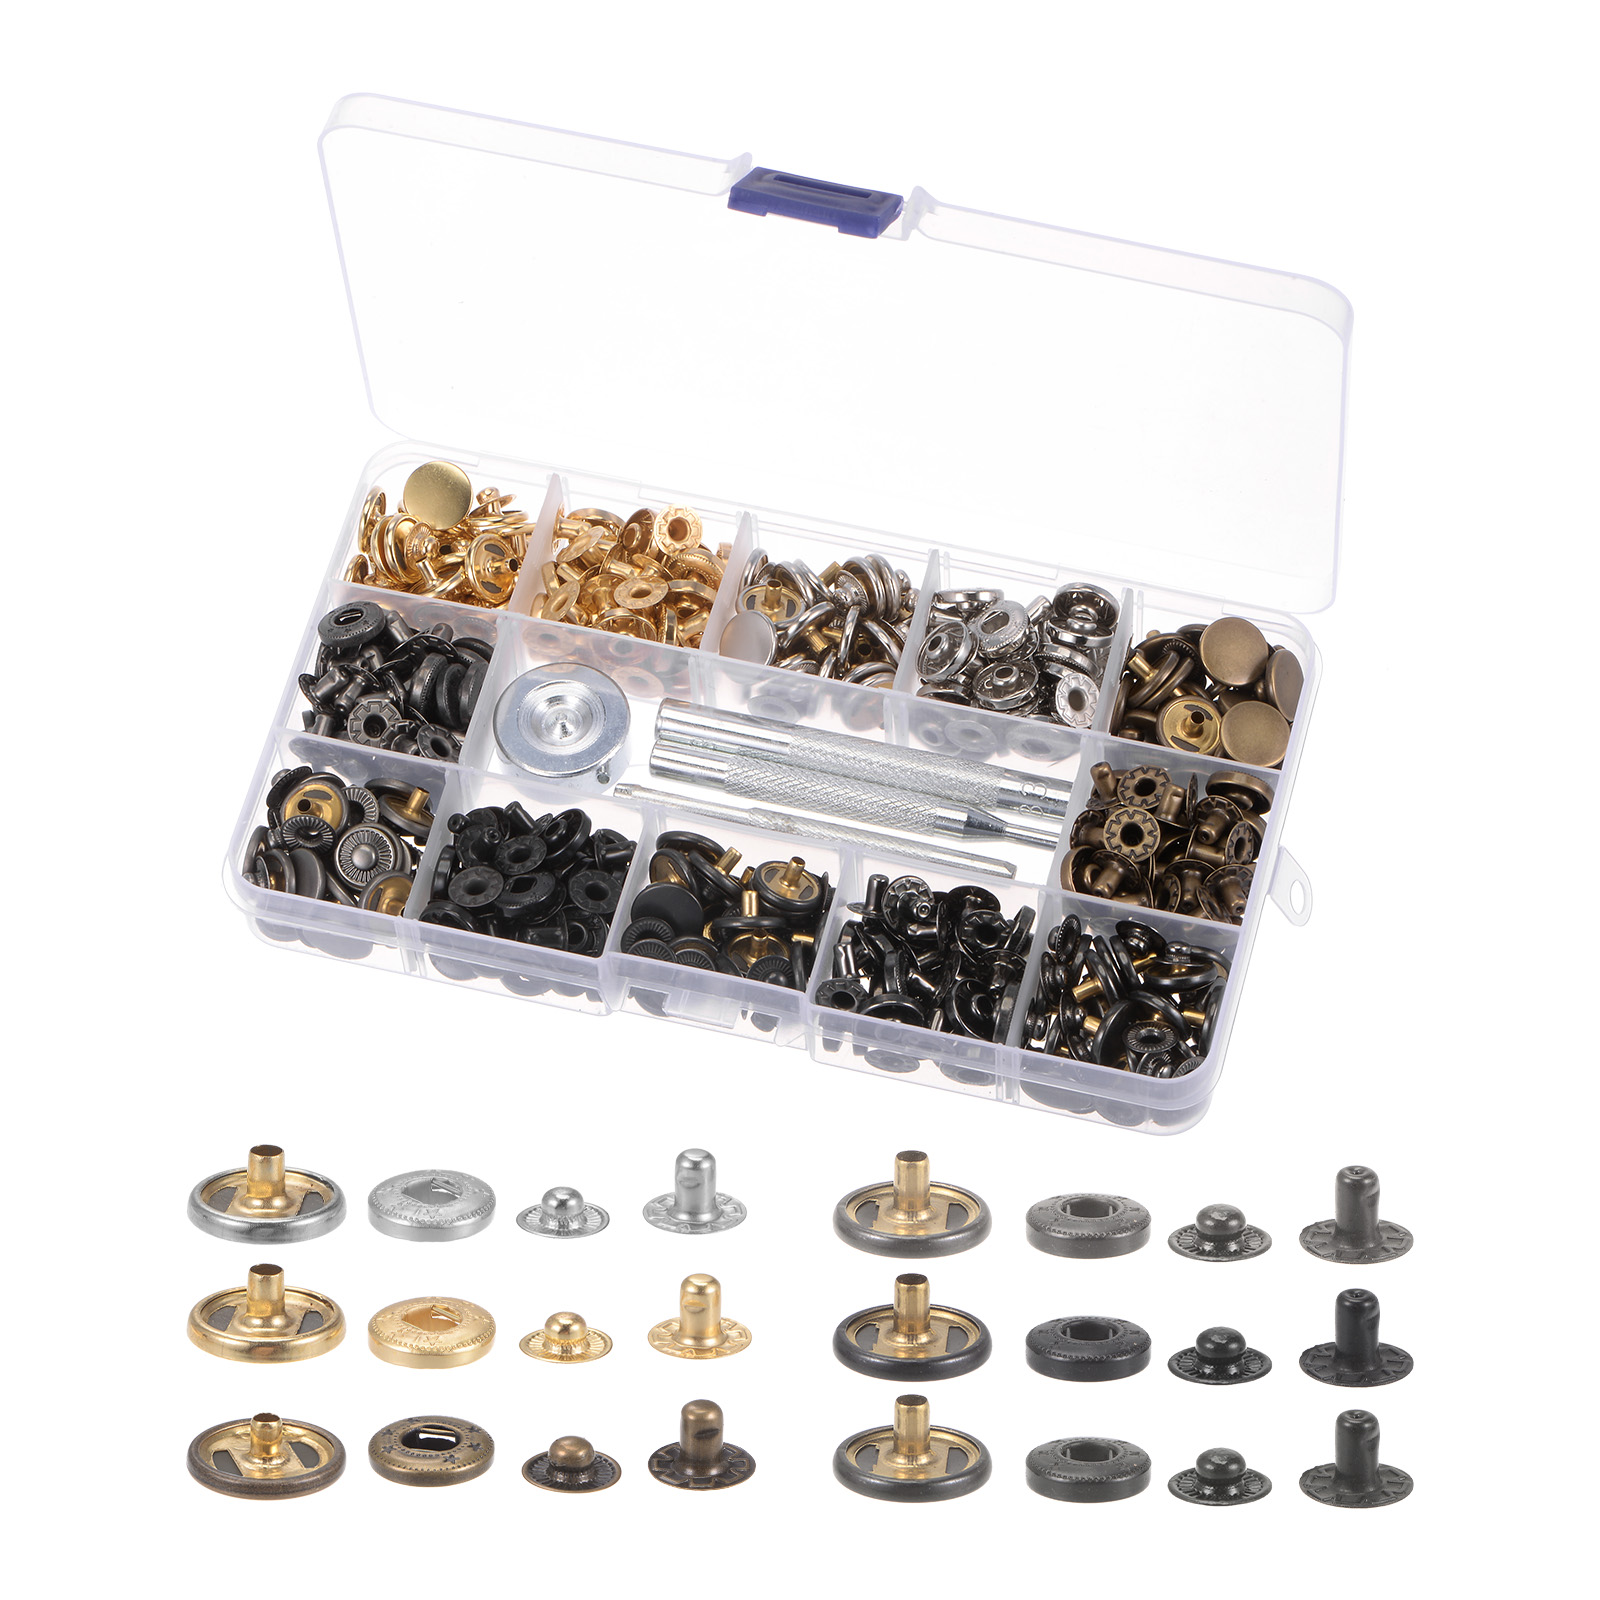 Unique Bargains 120 Sets Snap Fasteners Kit 6 Colors with 4 Setter Tools & Box for DIY Clothing